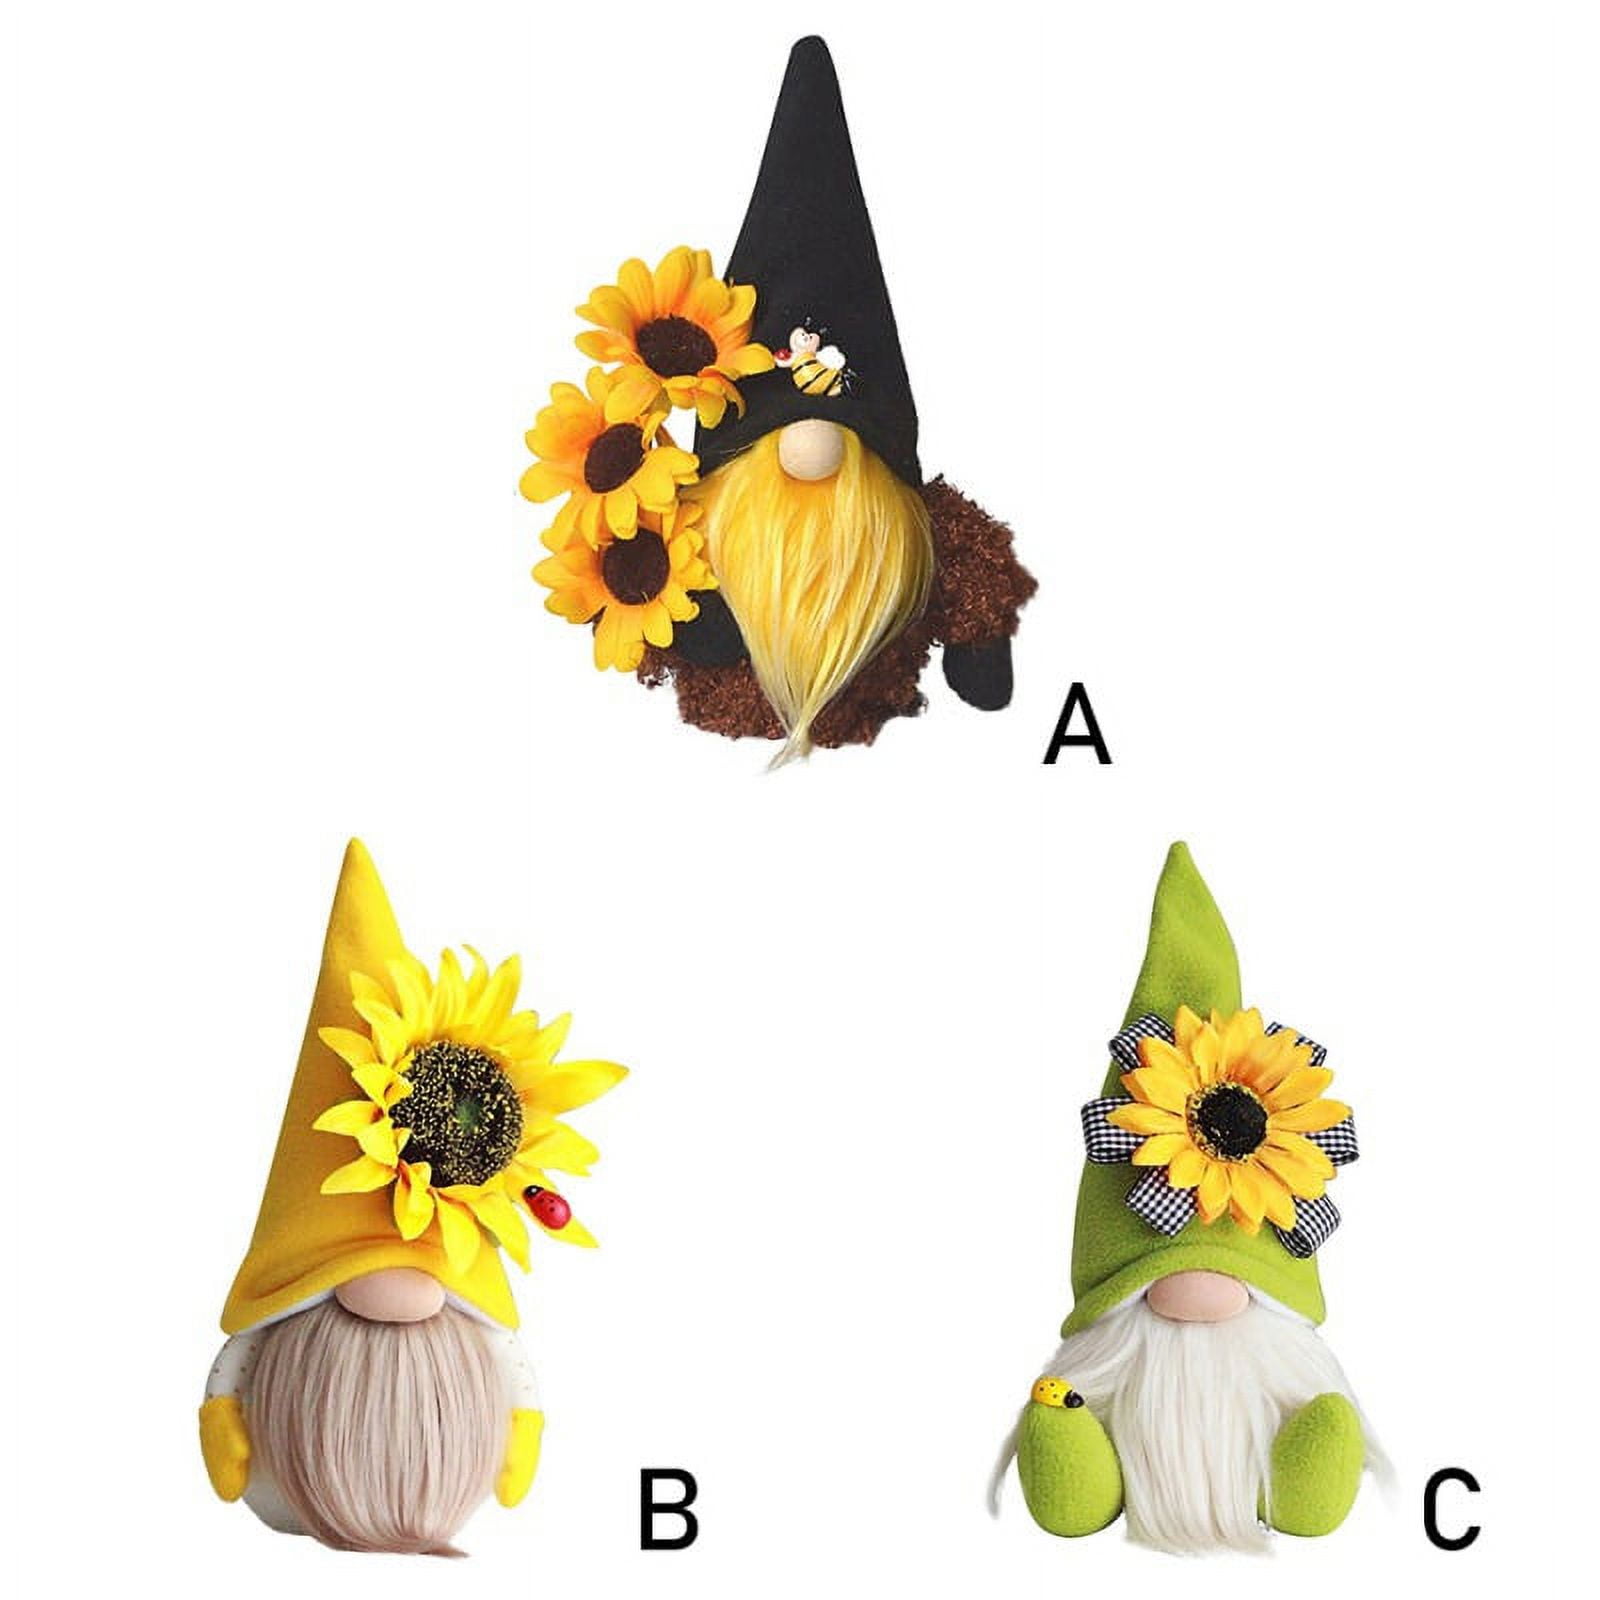 2 Pack Sunflower Garden Gnome, Bumble Bee Gnomes Plush, Bumble Bee Gnomes  Plush Decor,World Bee Day Fall Decor ,Fall Holiday Bee Decorations  Ornaments for The Home 